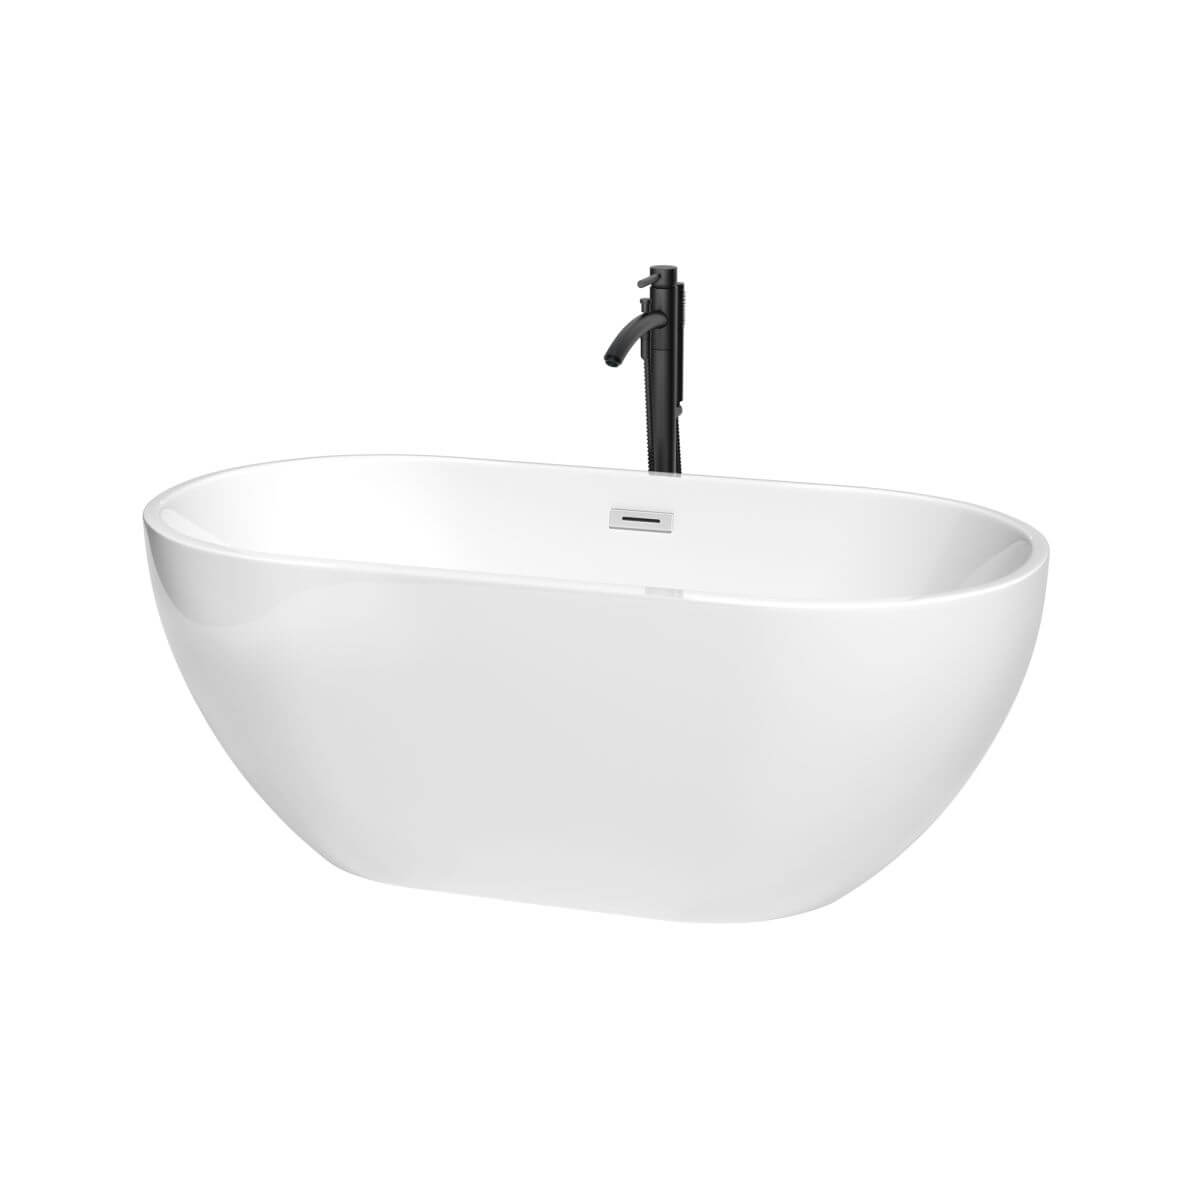 Wyndham Collection Brooklyn 60 inch Freestanding Bathtub in White with Polished Chrome Trim and Floor Mounted Faucet in Matte Black - WCOBT200060PCATPBK